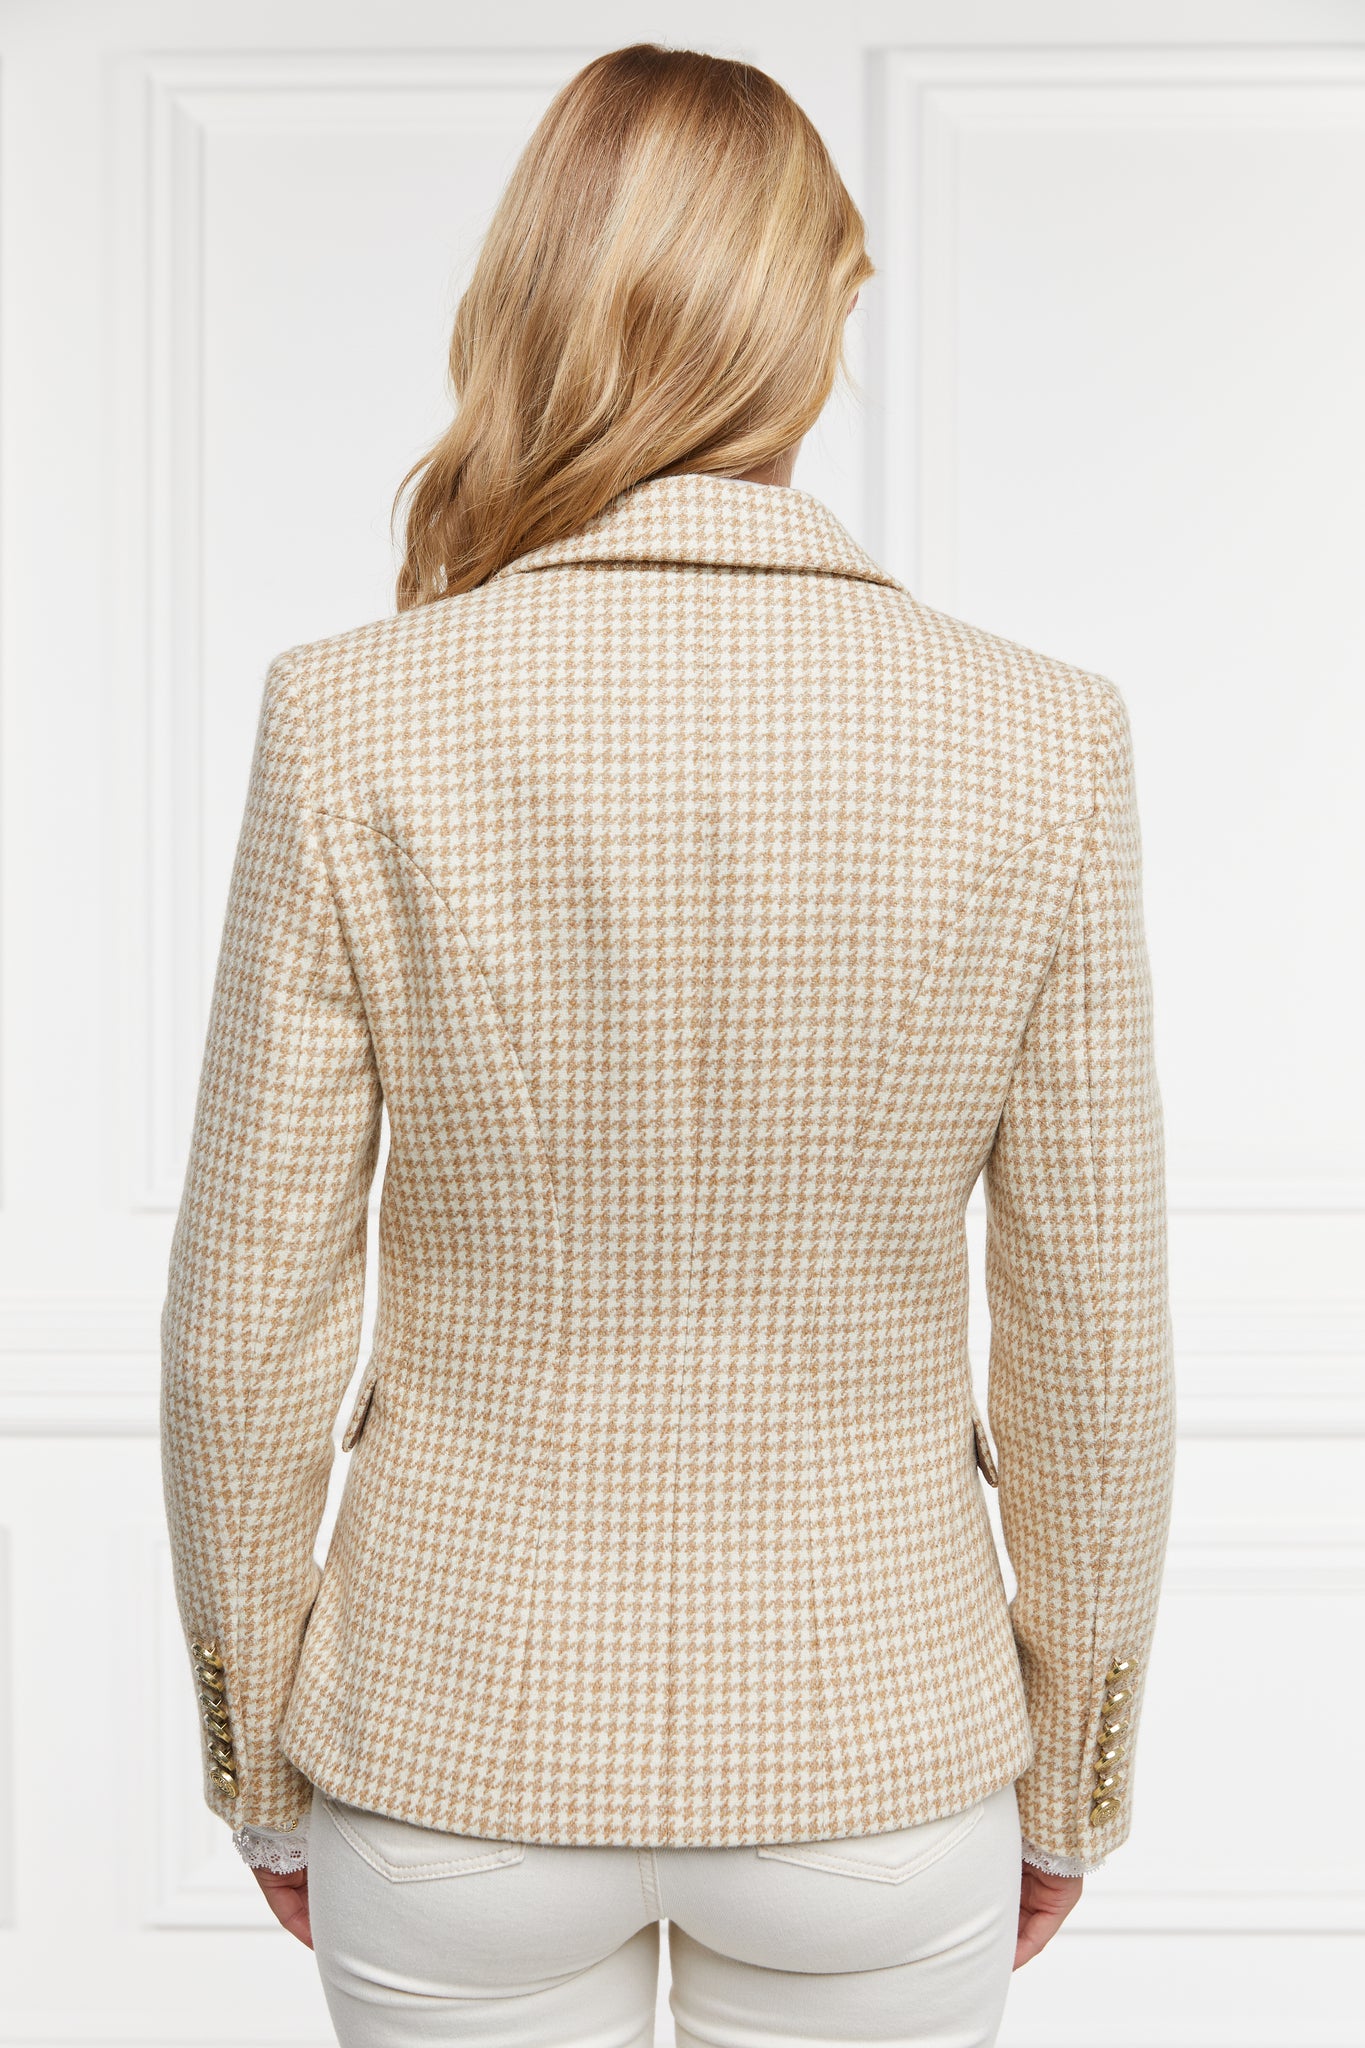 back of womens cream and white small scale houndstooth fitted double breasted blazer with single button fastening to the one central button for more form fitted tailored look finished with two pockets at hips and gold button details on front and cuffs